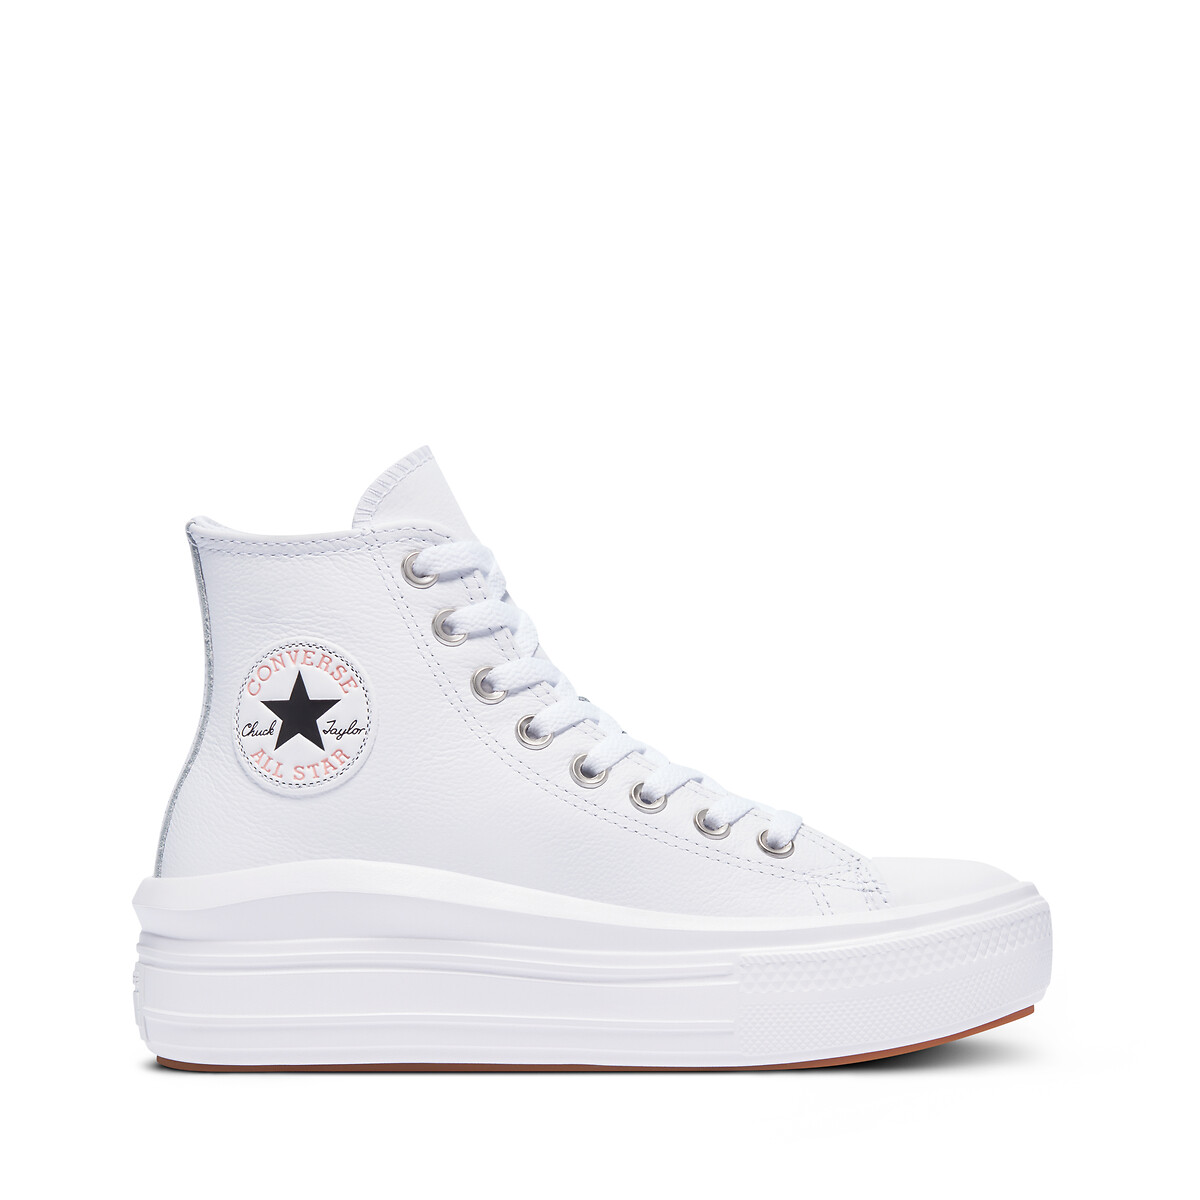 Chuck taylor all star move leather high 